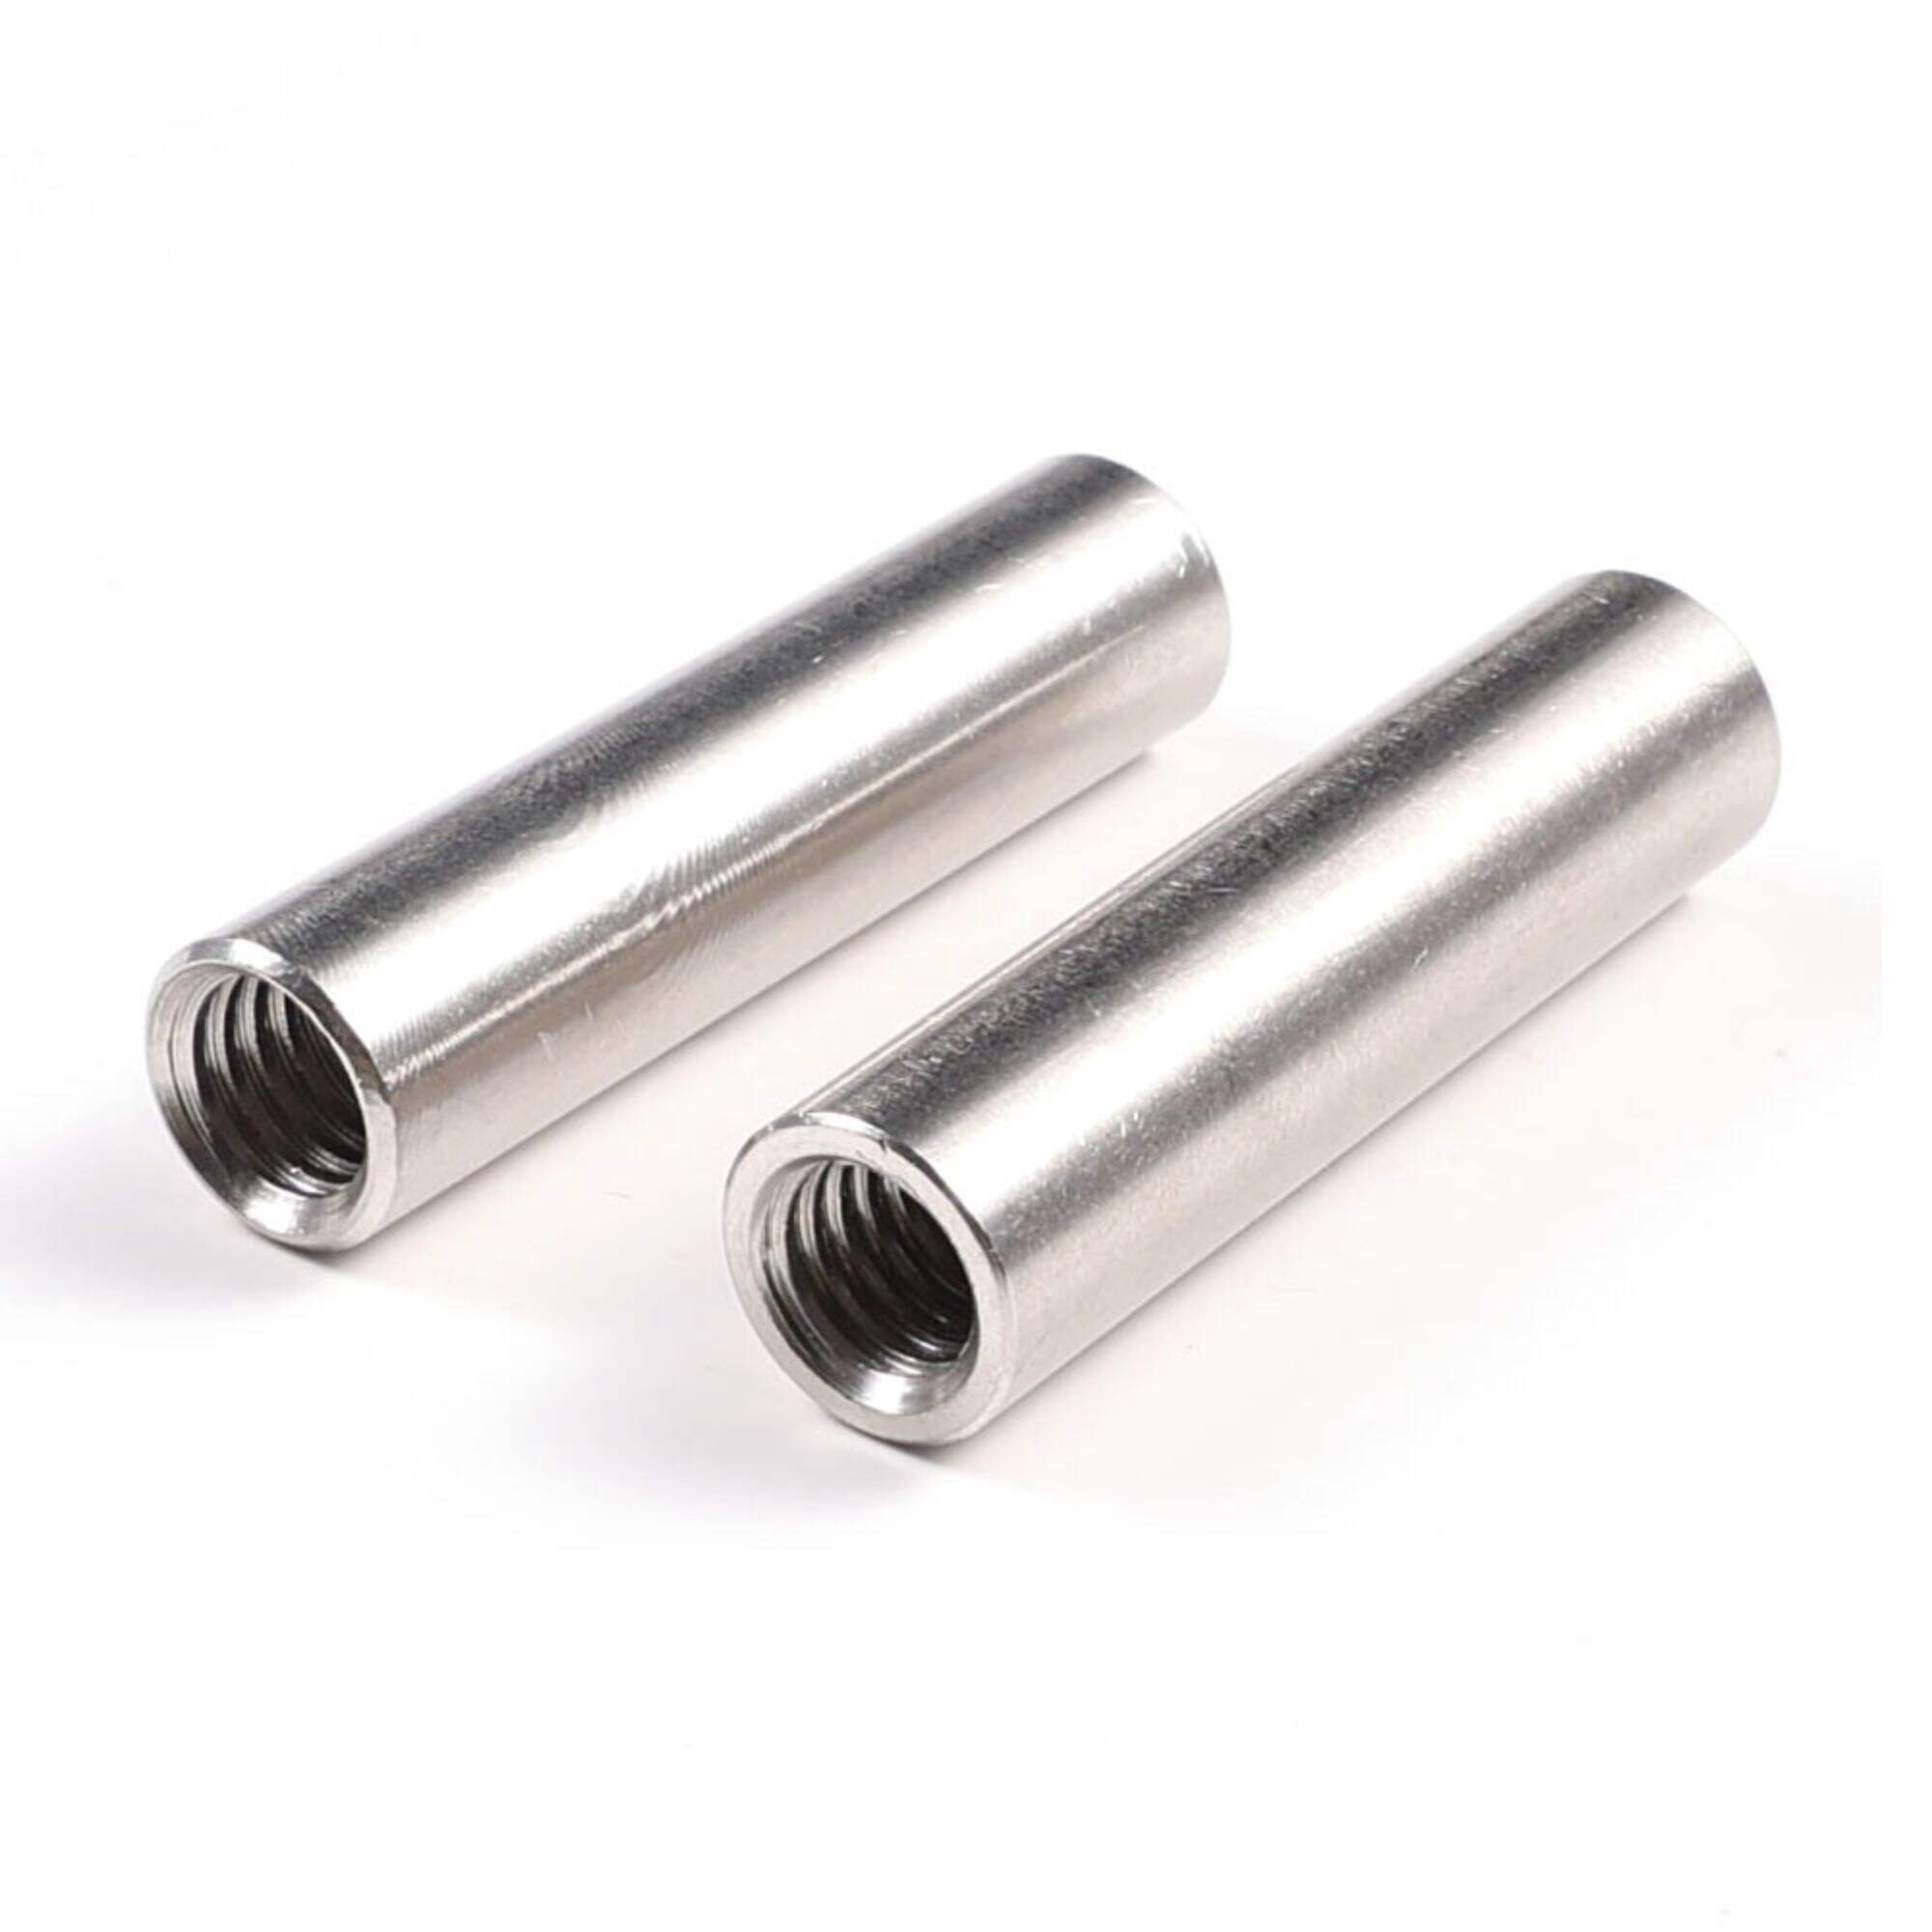 Rod Coupler Nut Supplier Din6334 Stainless Steel Hexagon Round Long Studding Coupling Nut